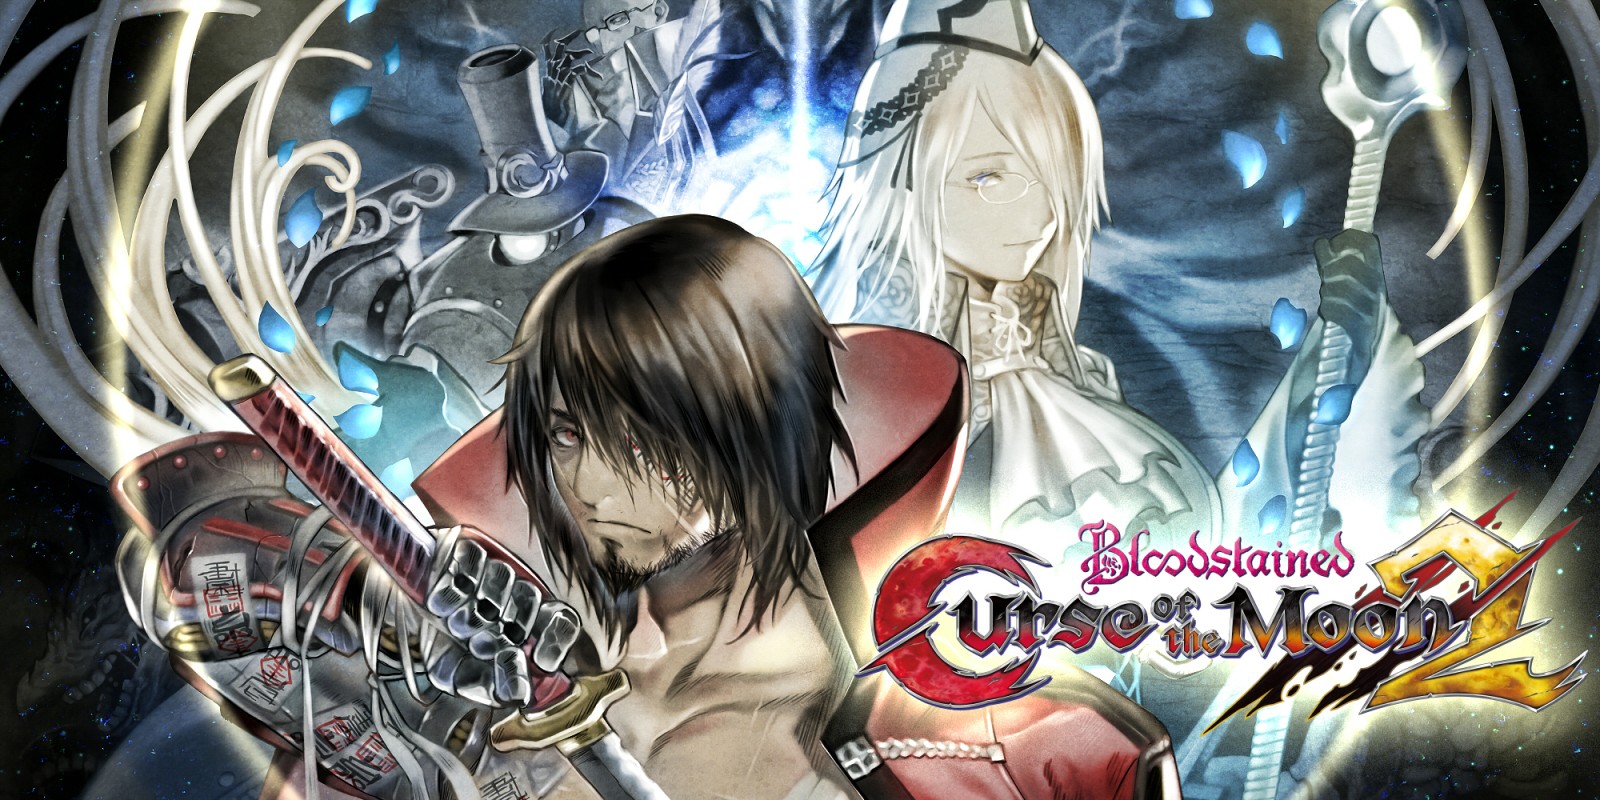 Bloodstained Curse Of The Moon 2